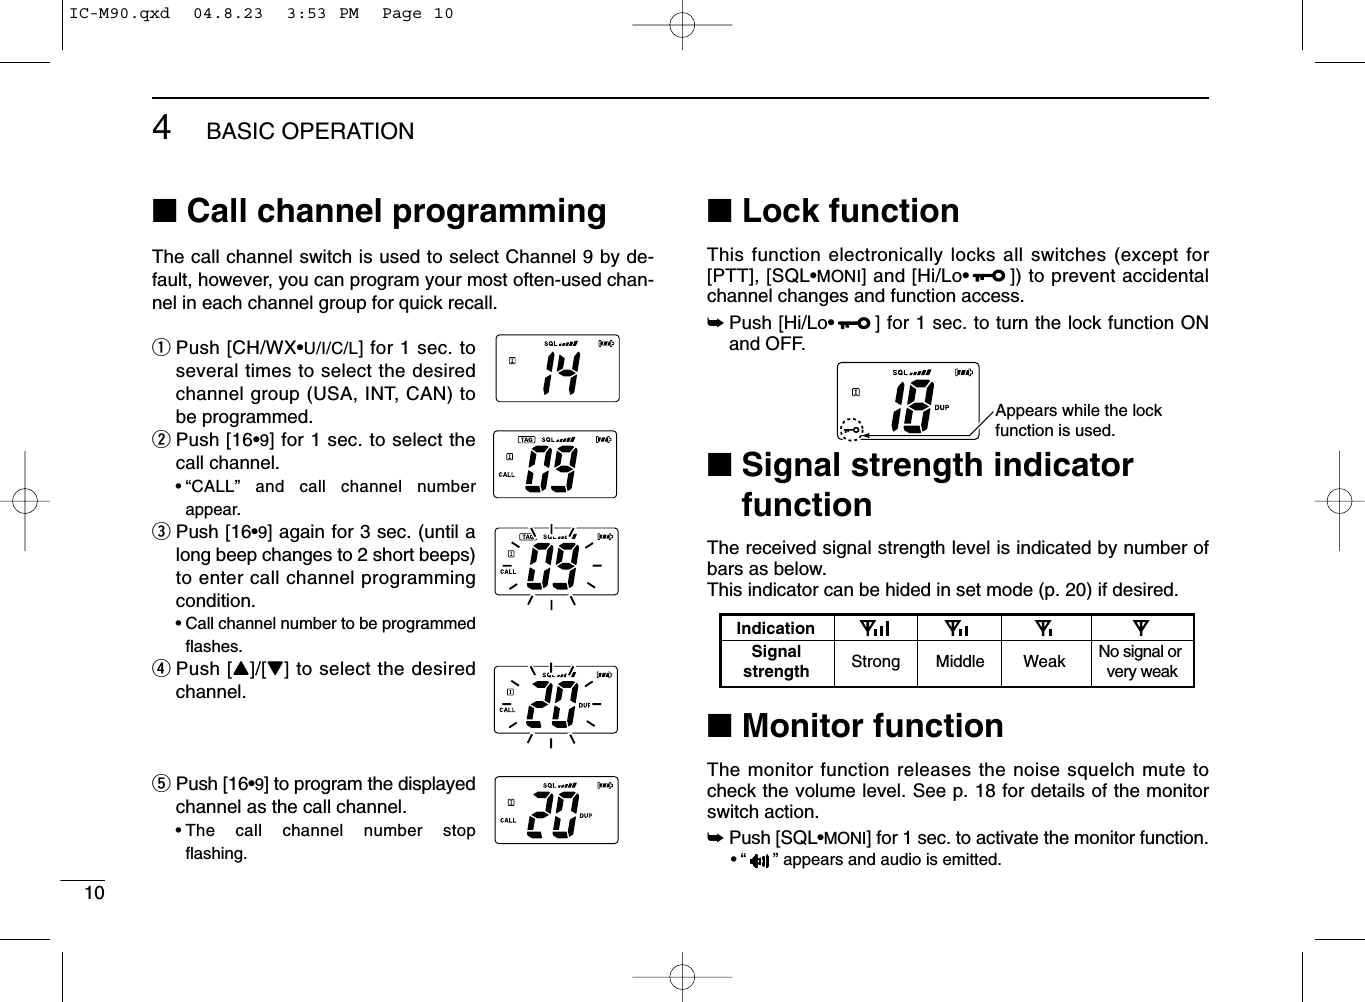 104BASIC OPERATION■Call channel programmingThe call channel switch is used to select Channel 9 by de-fault, however, you can program your most often-used chan-nel in each channel group for quick recall.qPush [CH/WX•U/I/C/L] for 1 sec. toseveral times to select the desiredchannel group (USA, INT, CAN) tobe programmed.wPush [16•9] for 1 sec. to select thecall channel.•“CALL” and call channel numberappear.ePush [16•9] again for 3 sec. (until along beep changes to 2 short beeps)to enter call channel programmingcondition.•Call channel number to be programmedﬂashes.rPush [Y]/[Z] to select the desiredchannel.tPush [16•9] to program the displayedchannel as the call channel.•The call channel number stopﬂashing.■Lock functionThis function electronically locks all switches (except for[PTT], [SQL•MONI] and [Hi/Lo•]) to prevent accidentalchannel changes and function access.➥Push [Hi/Lo•] for 1 sec. to turn the lock function ONand OFF.■Signal strength indicatorfunctionThe received signal strength level is indicated by number ofbars as below.This indicator can be hided in set mode (p. 20) if desired.■Monitor functionThe monitor function releases the noise squelch mute tocheck the volume level. See p. 18 for details of the monitorswitch action.➥Push [SQL•MONI] for 1 sec. to activate the monitor function.•“ ” appears and audio is emitted.IndicationStrong Middle Weak No signal or very weakSignalstrengthAppears while the lock function is used.IC-M90.qxd  04.8.23  3:53 PM  Page 10